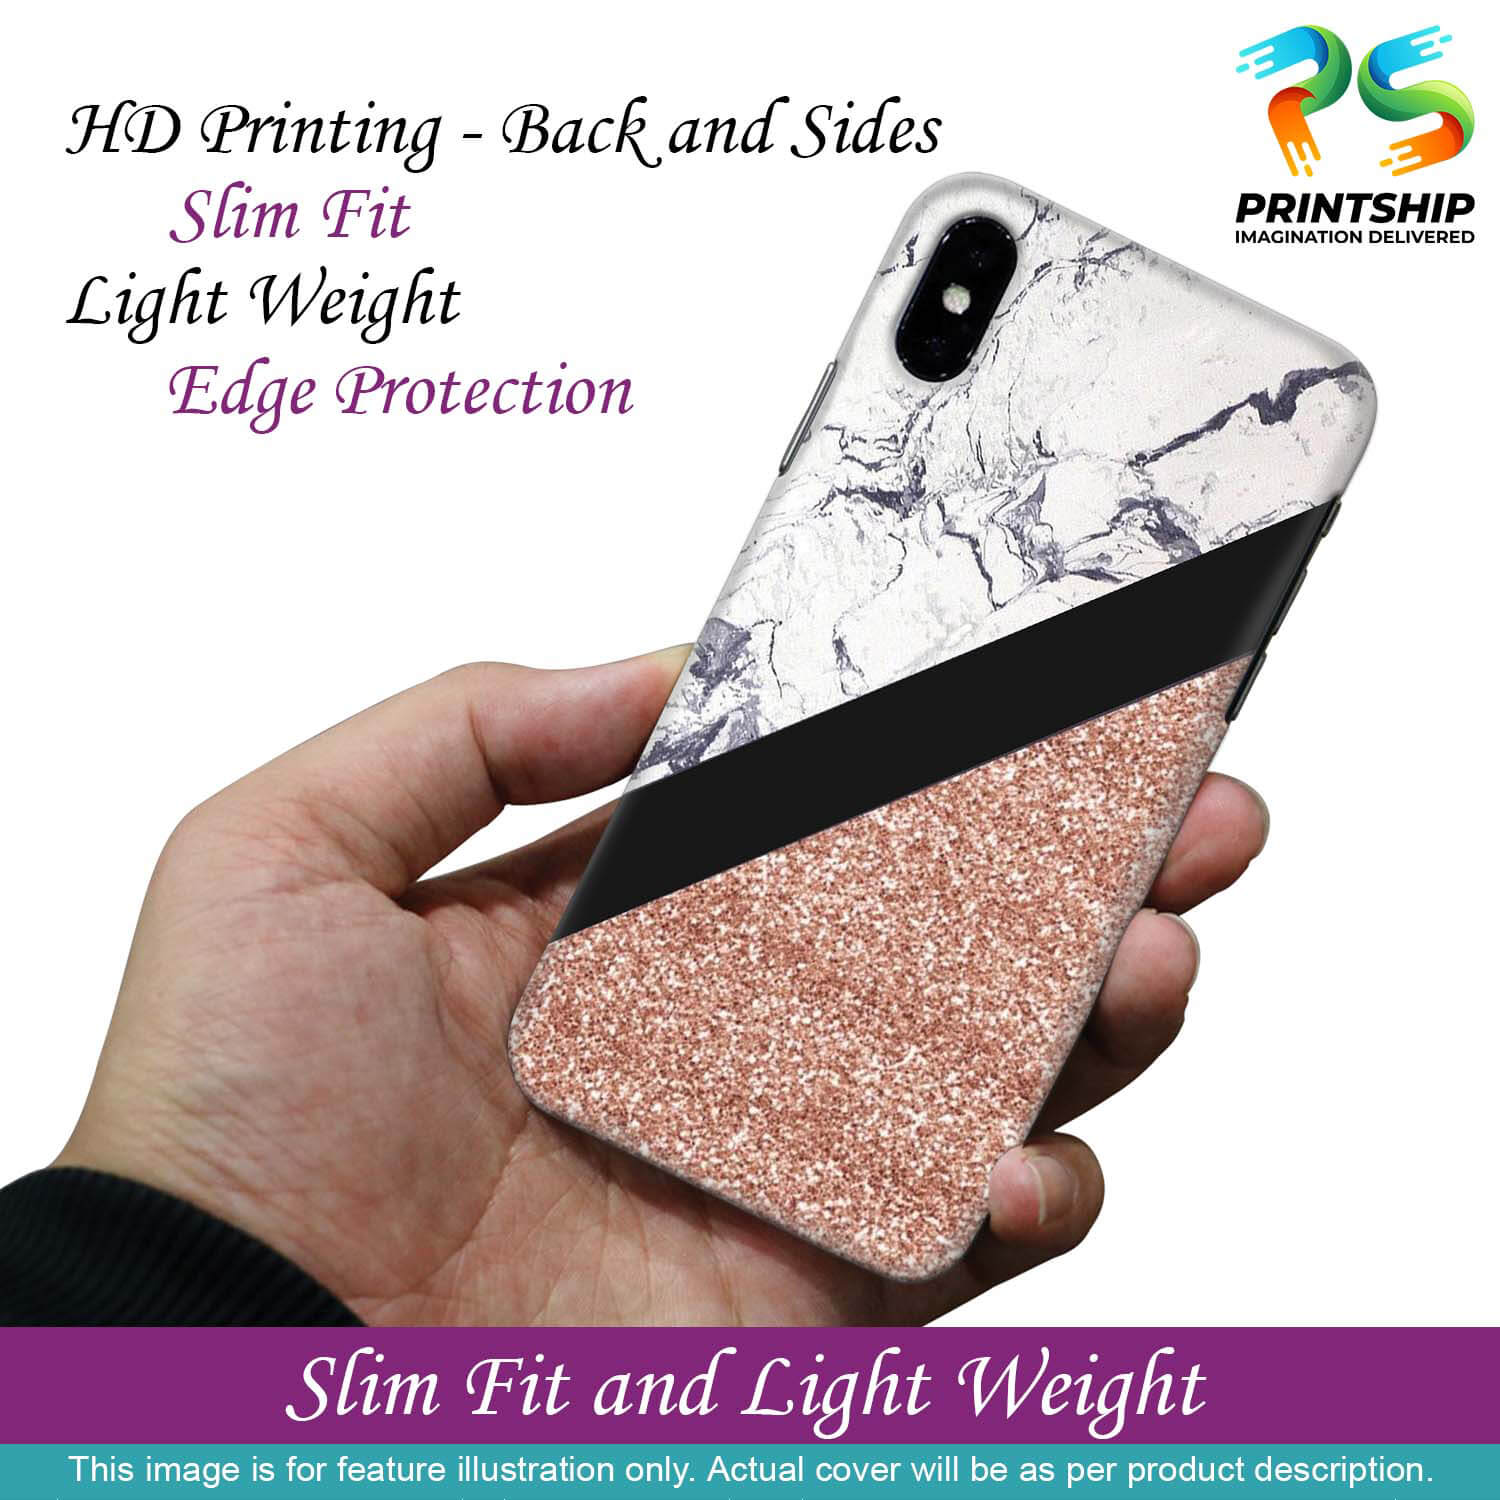 PS1331-Marble and More Back Cover for Realme 9 Pro+